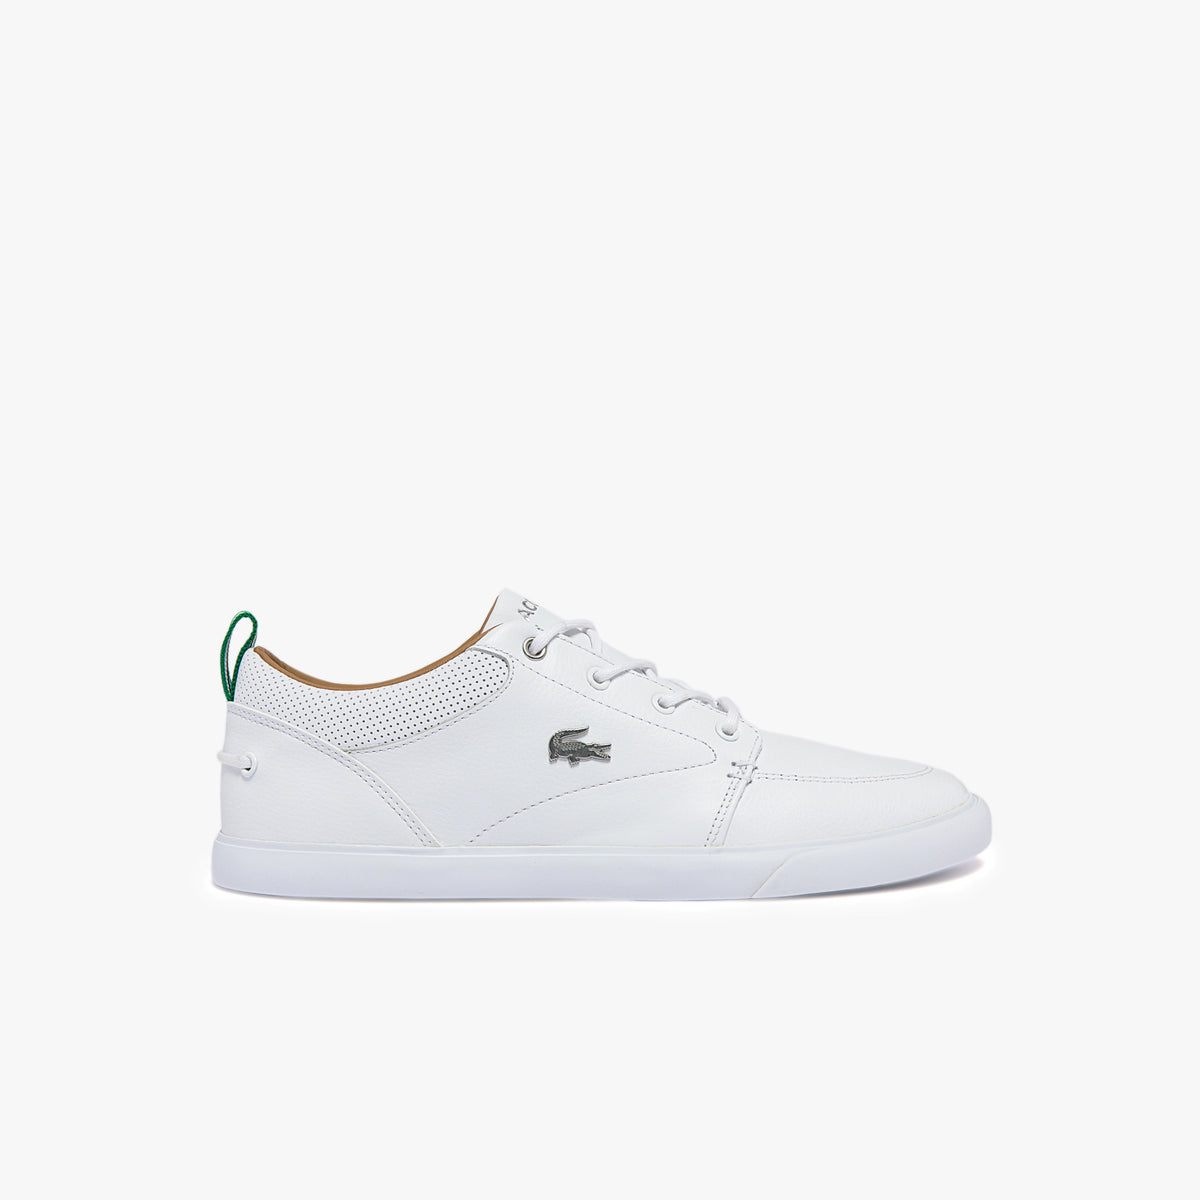 Men's Bayliss Sneakers - White